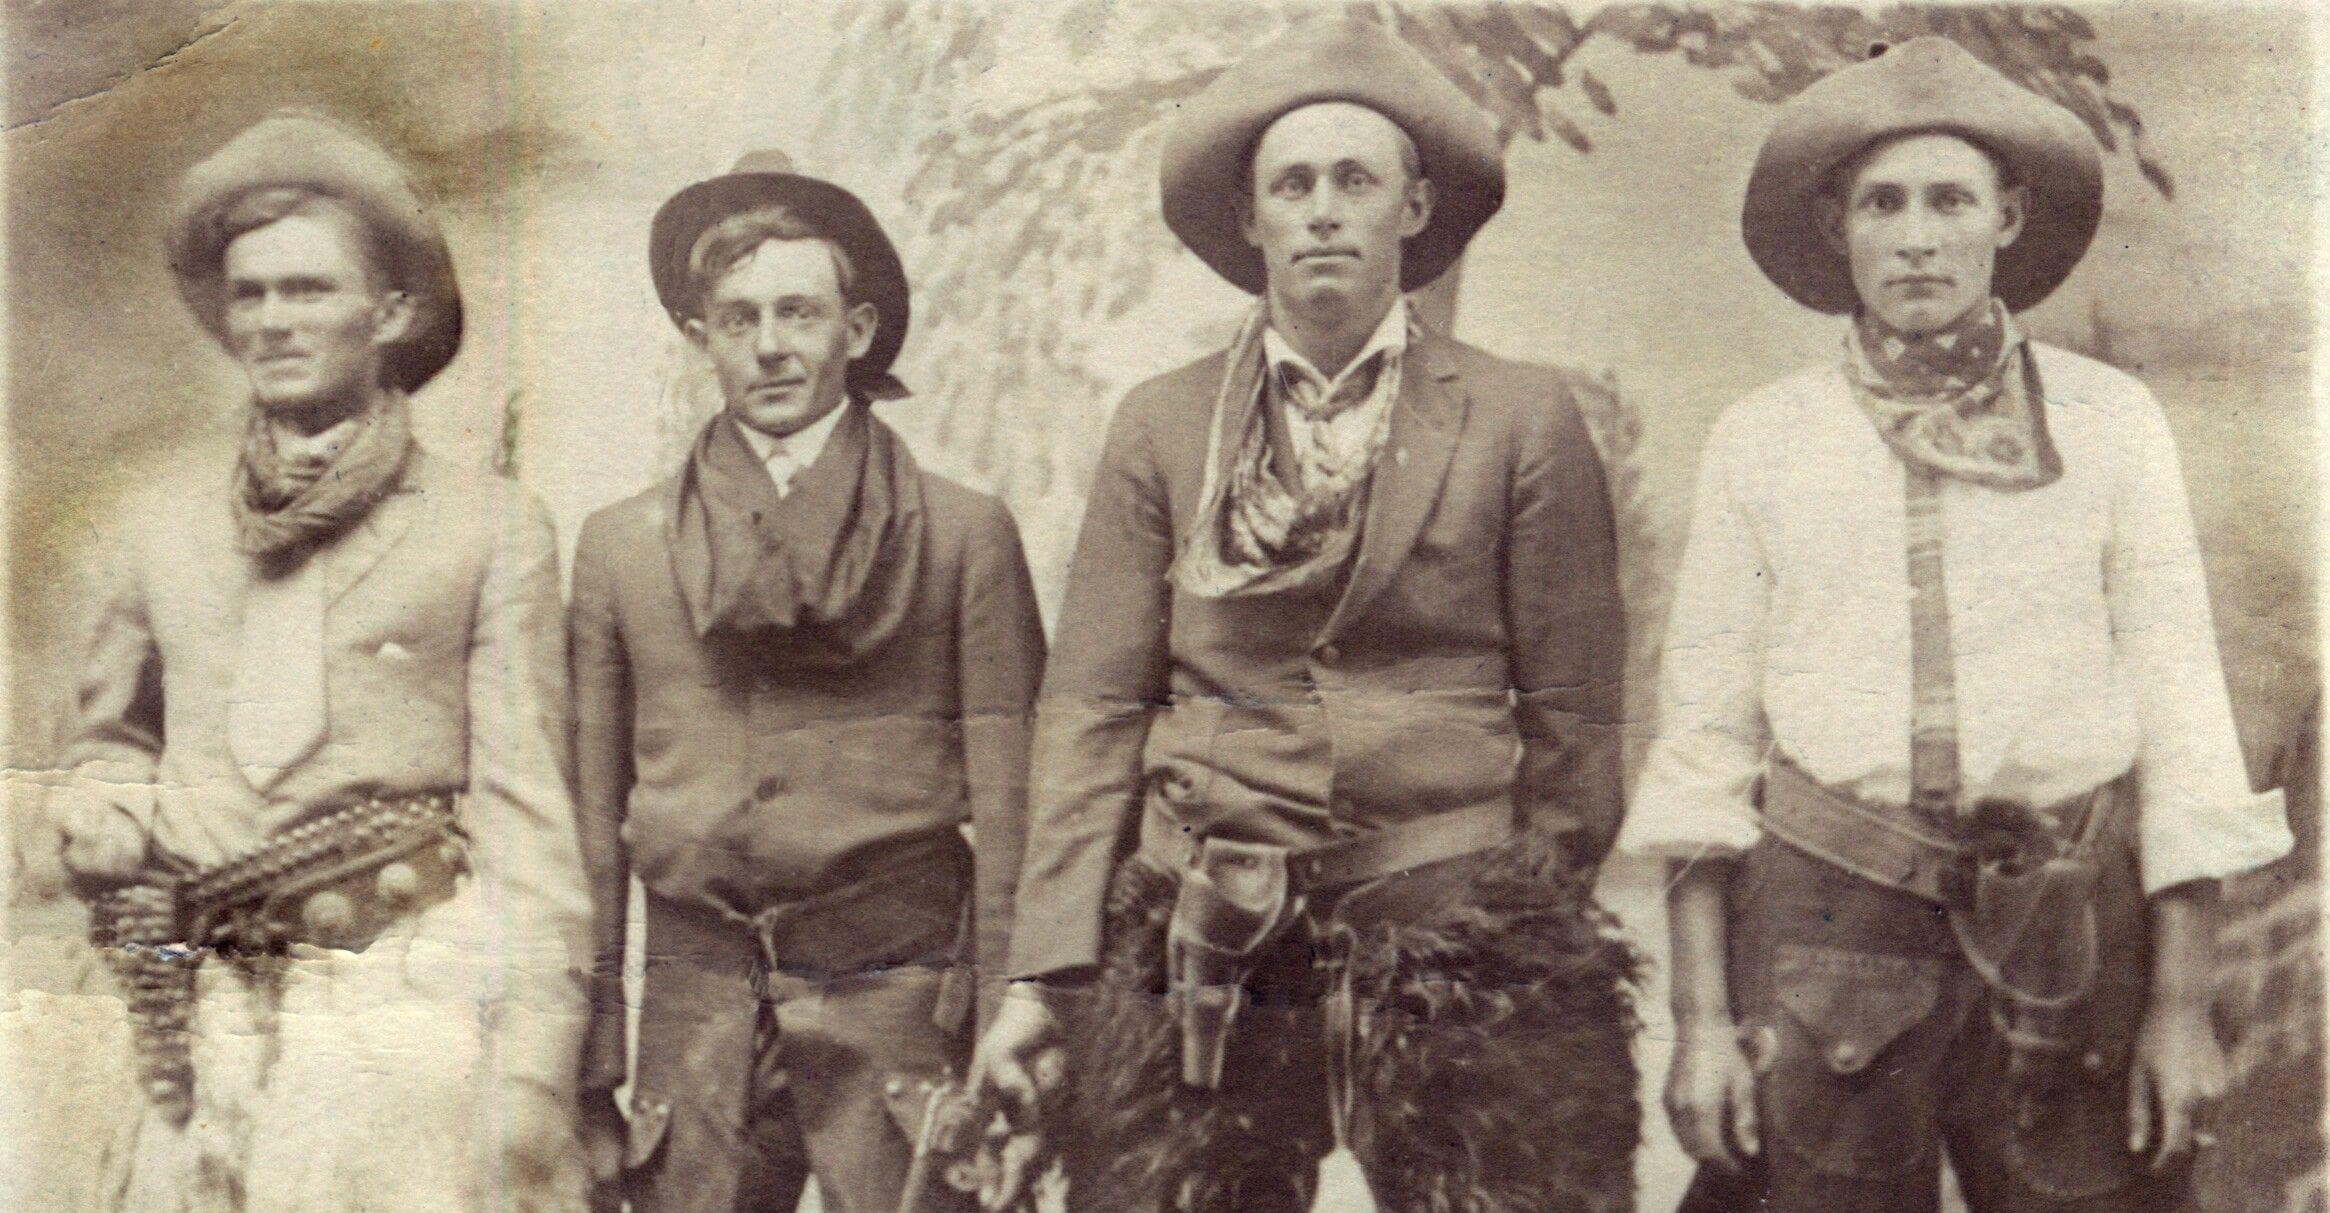 11 Myths and Misconceptions About the Wild West